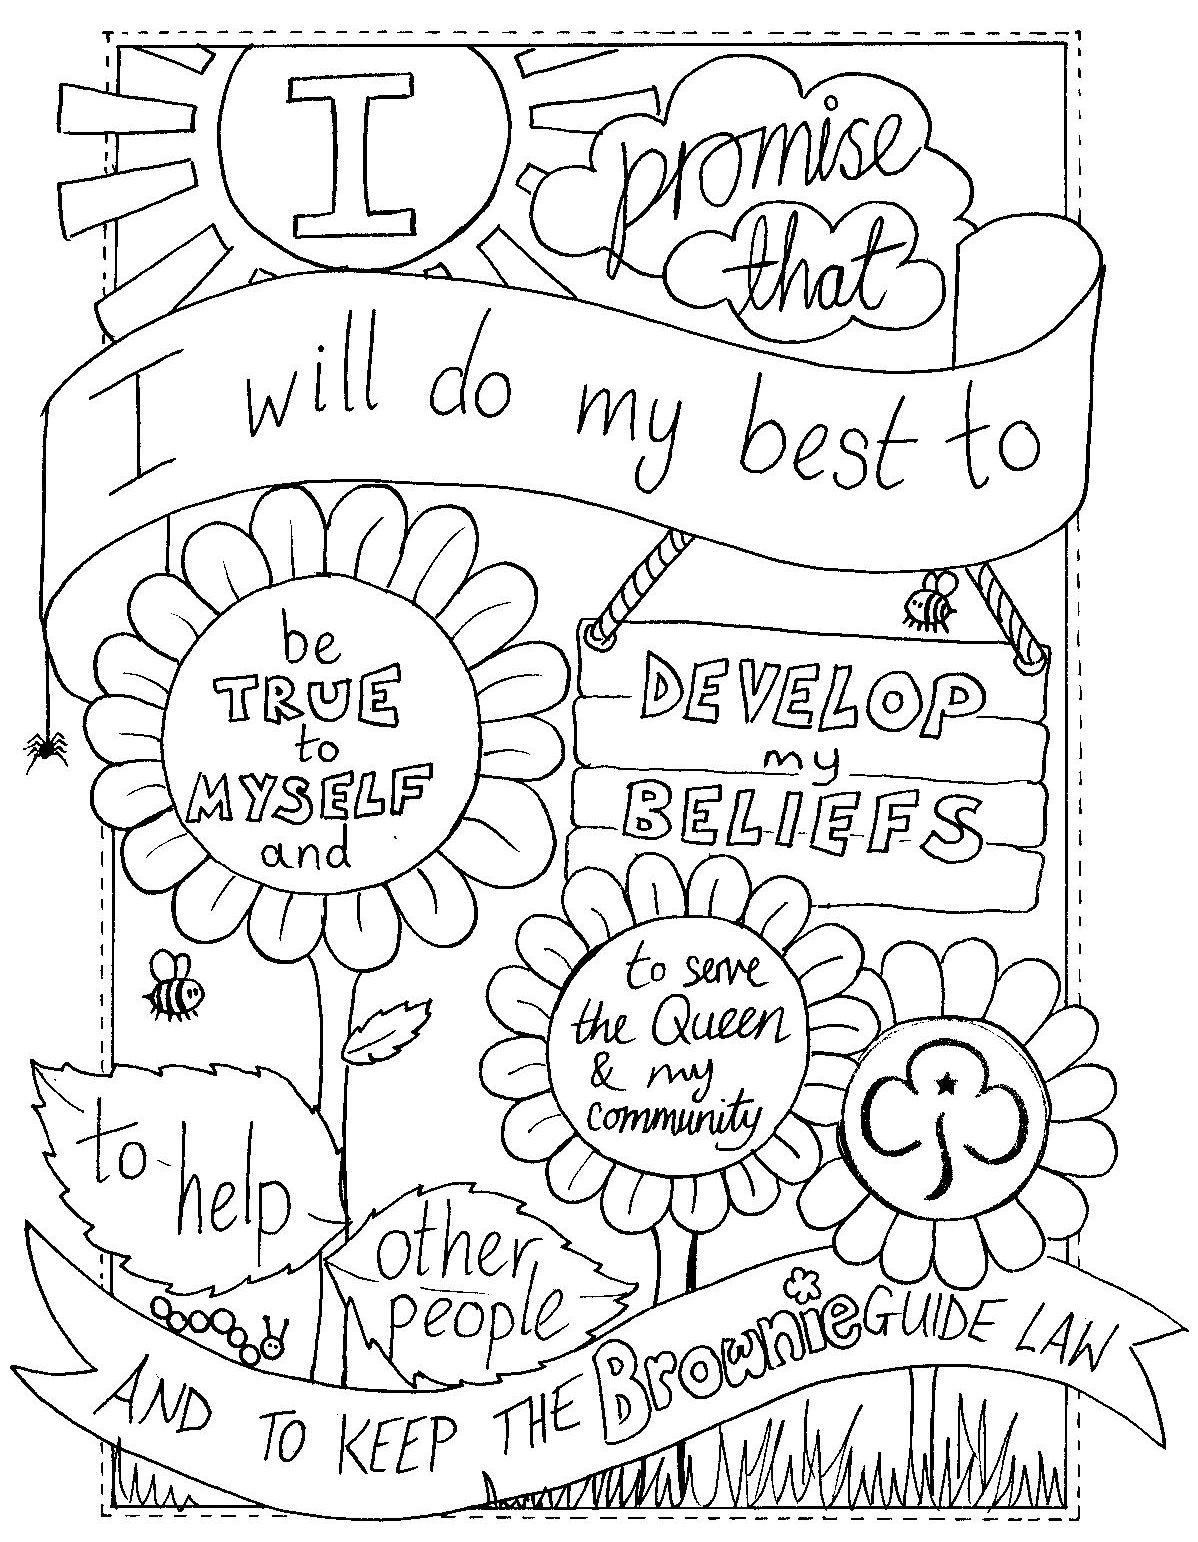 Girls Scout Law Coloring Pages
 UK Brownie Promise colouring sheet Created by emyb Emy